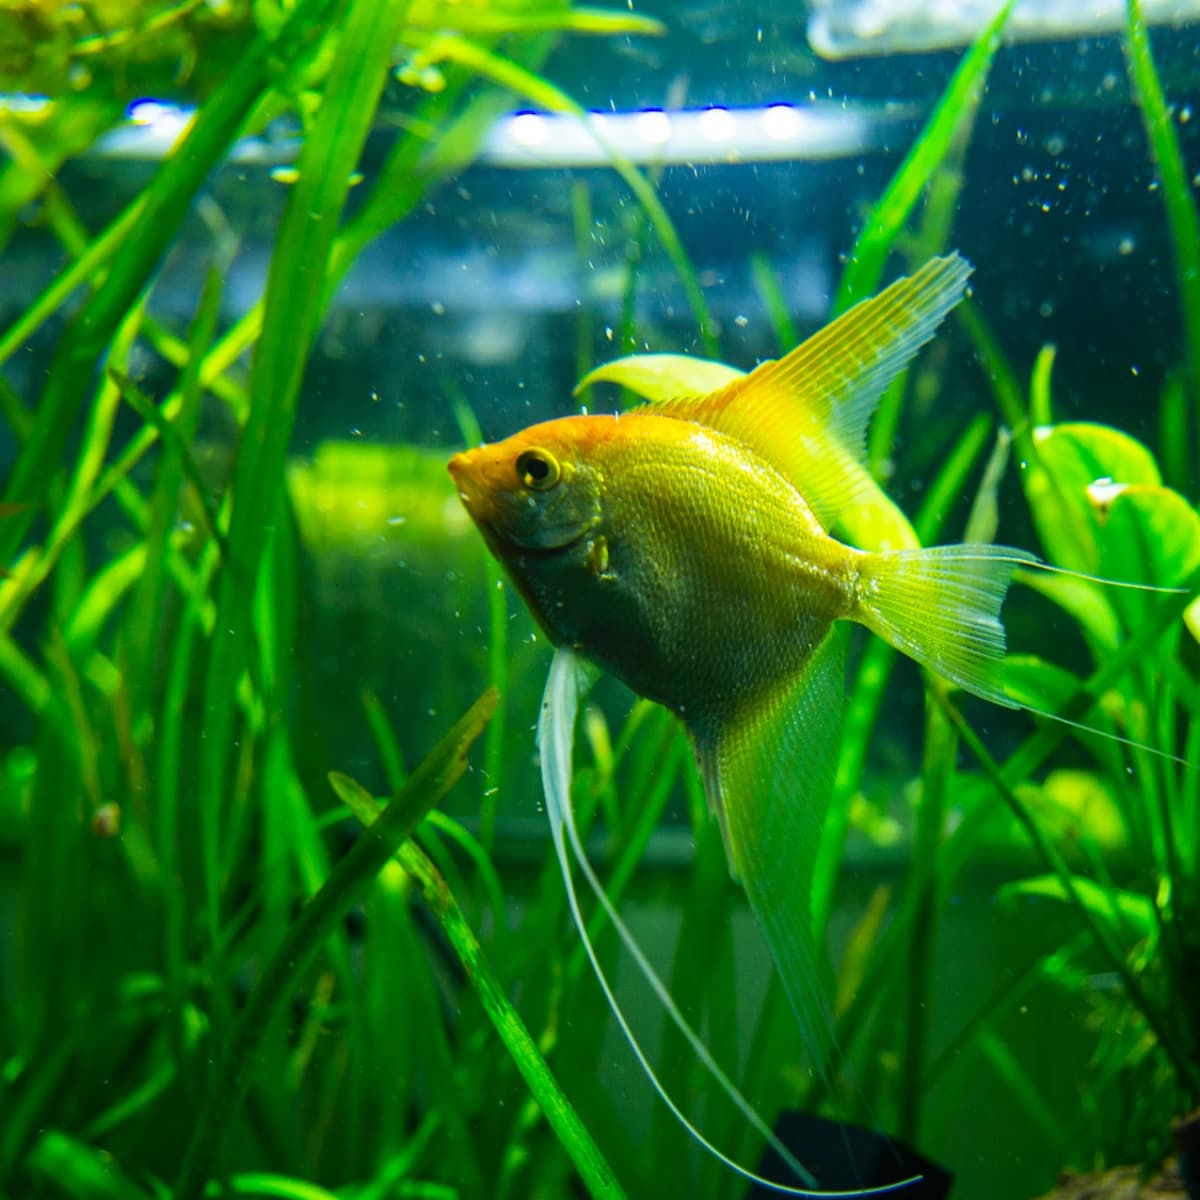 6 Easy Fish Tank Care and Maintenance Tips for Beginners - PetHelpful